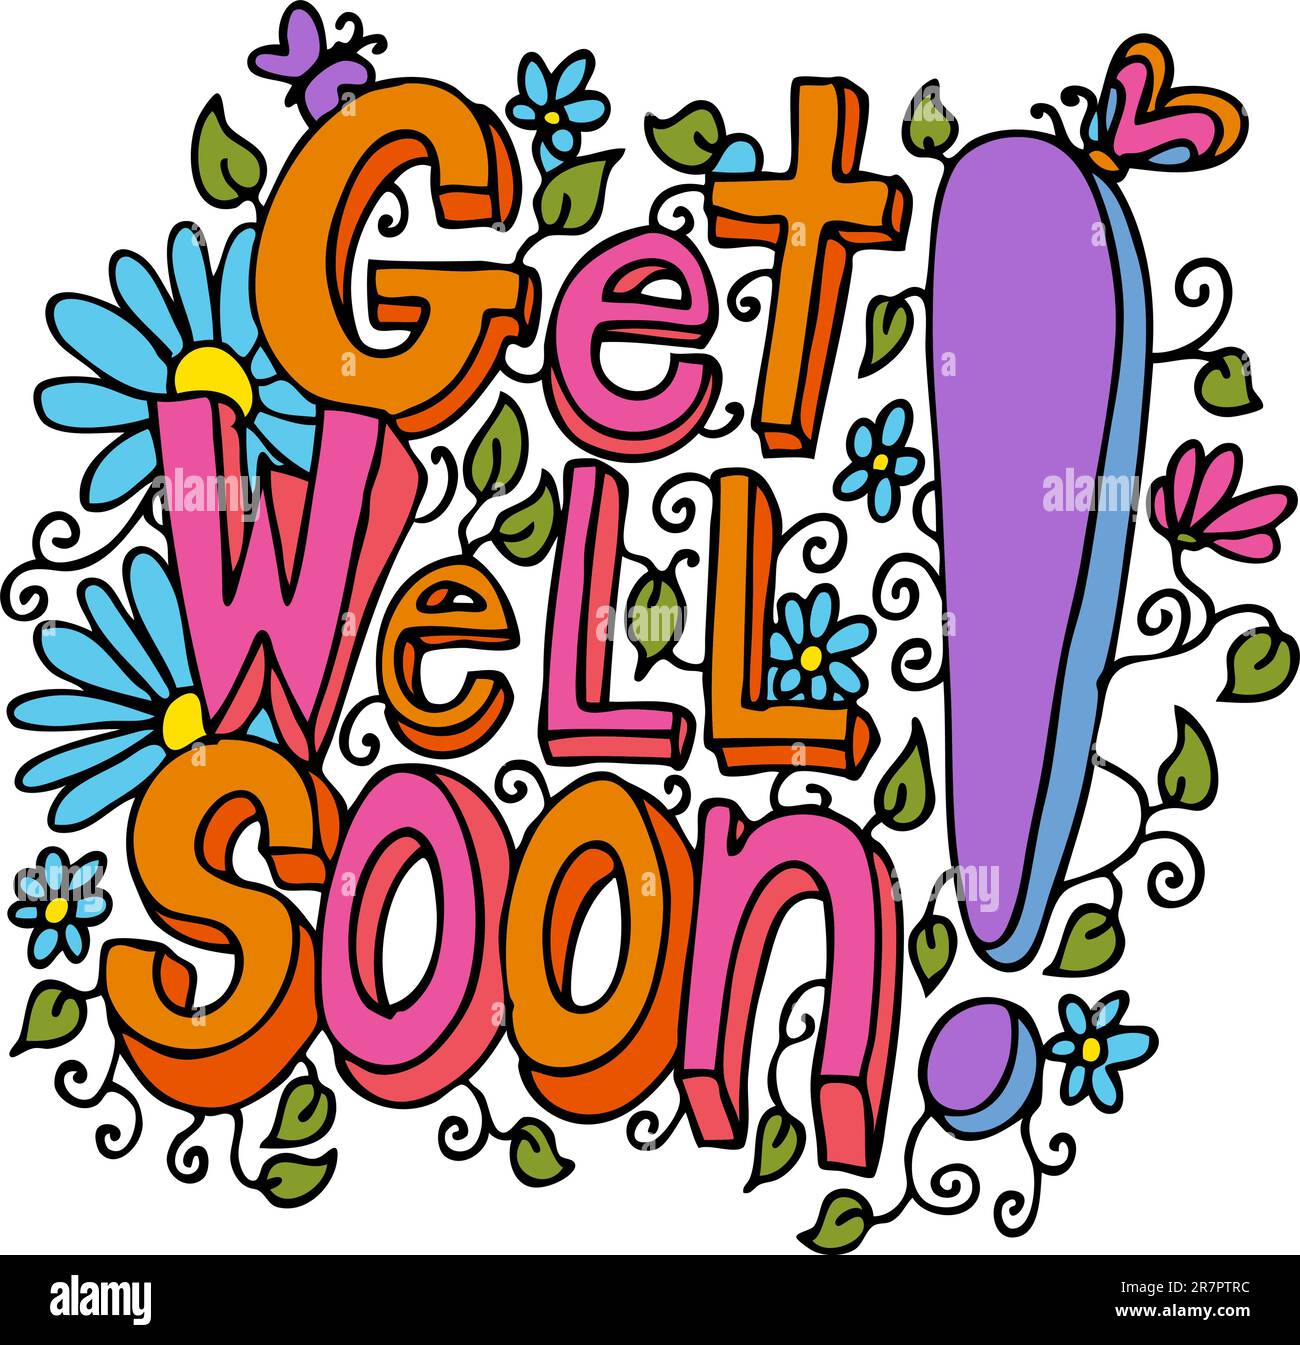 An image of a get well soon floral design drawing. Stock Vector